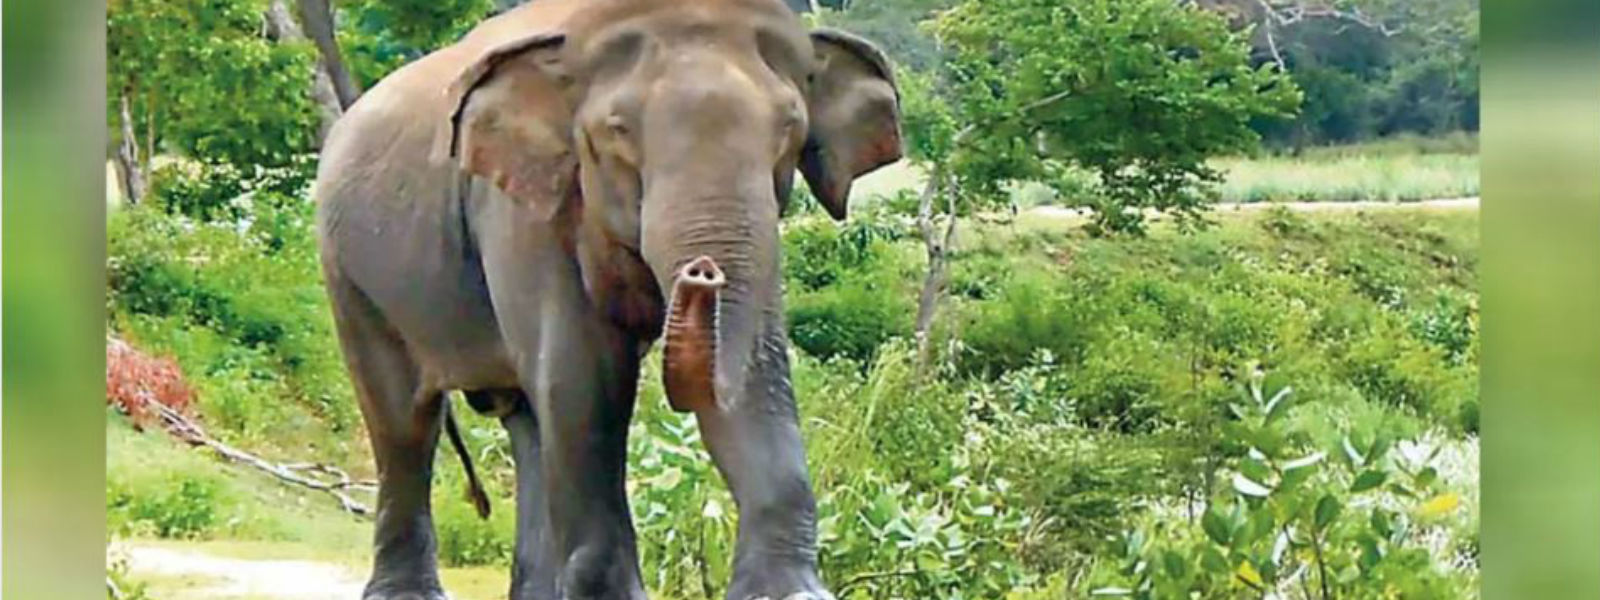 A woman and child killed in wild elephant attacks